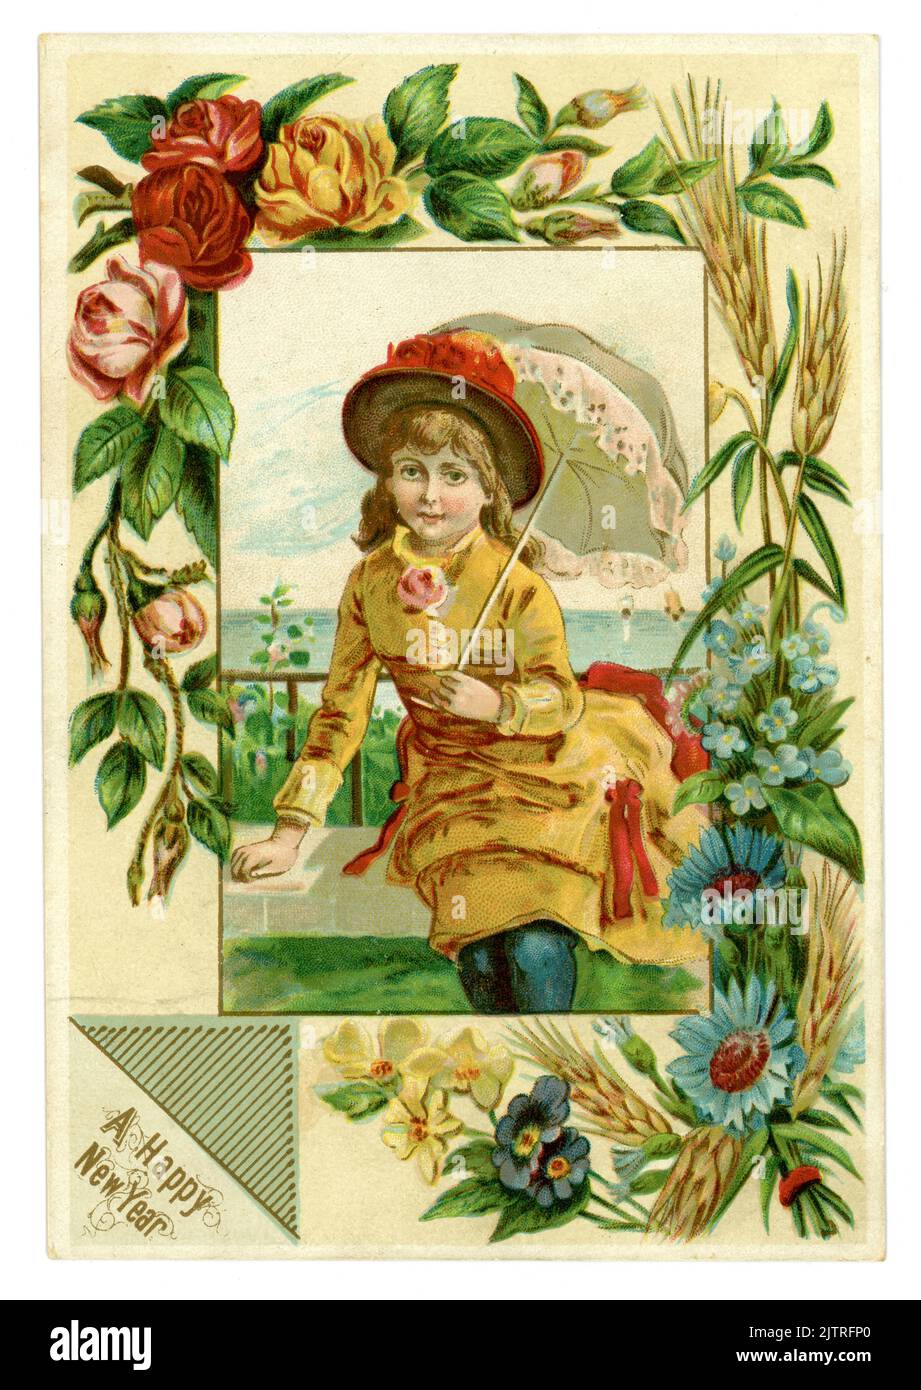 Original charming attractive Victorian New Years greetings card of a pretty young girl wearing a hat, holding a parasol, beautiful summer flowers border (forget-me-nots, cornflowers, roses, wheat) The caption is 'Wishing A Happy New Year',  circa 1888, U.K. Stock Photo